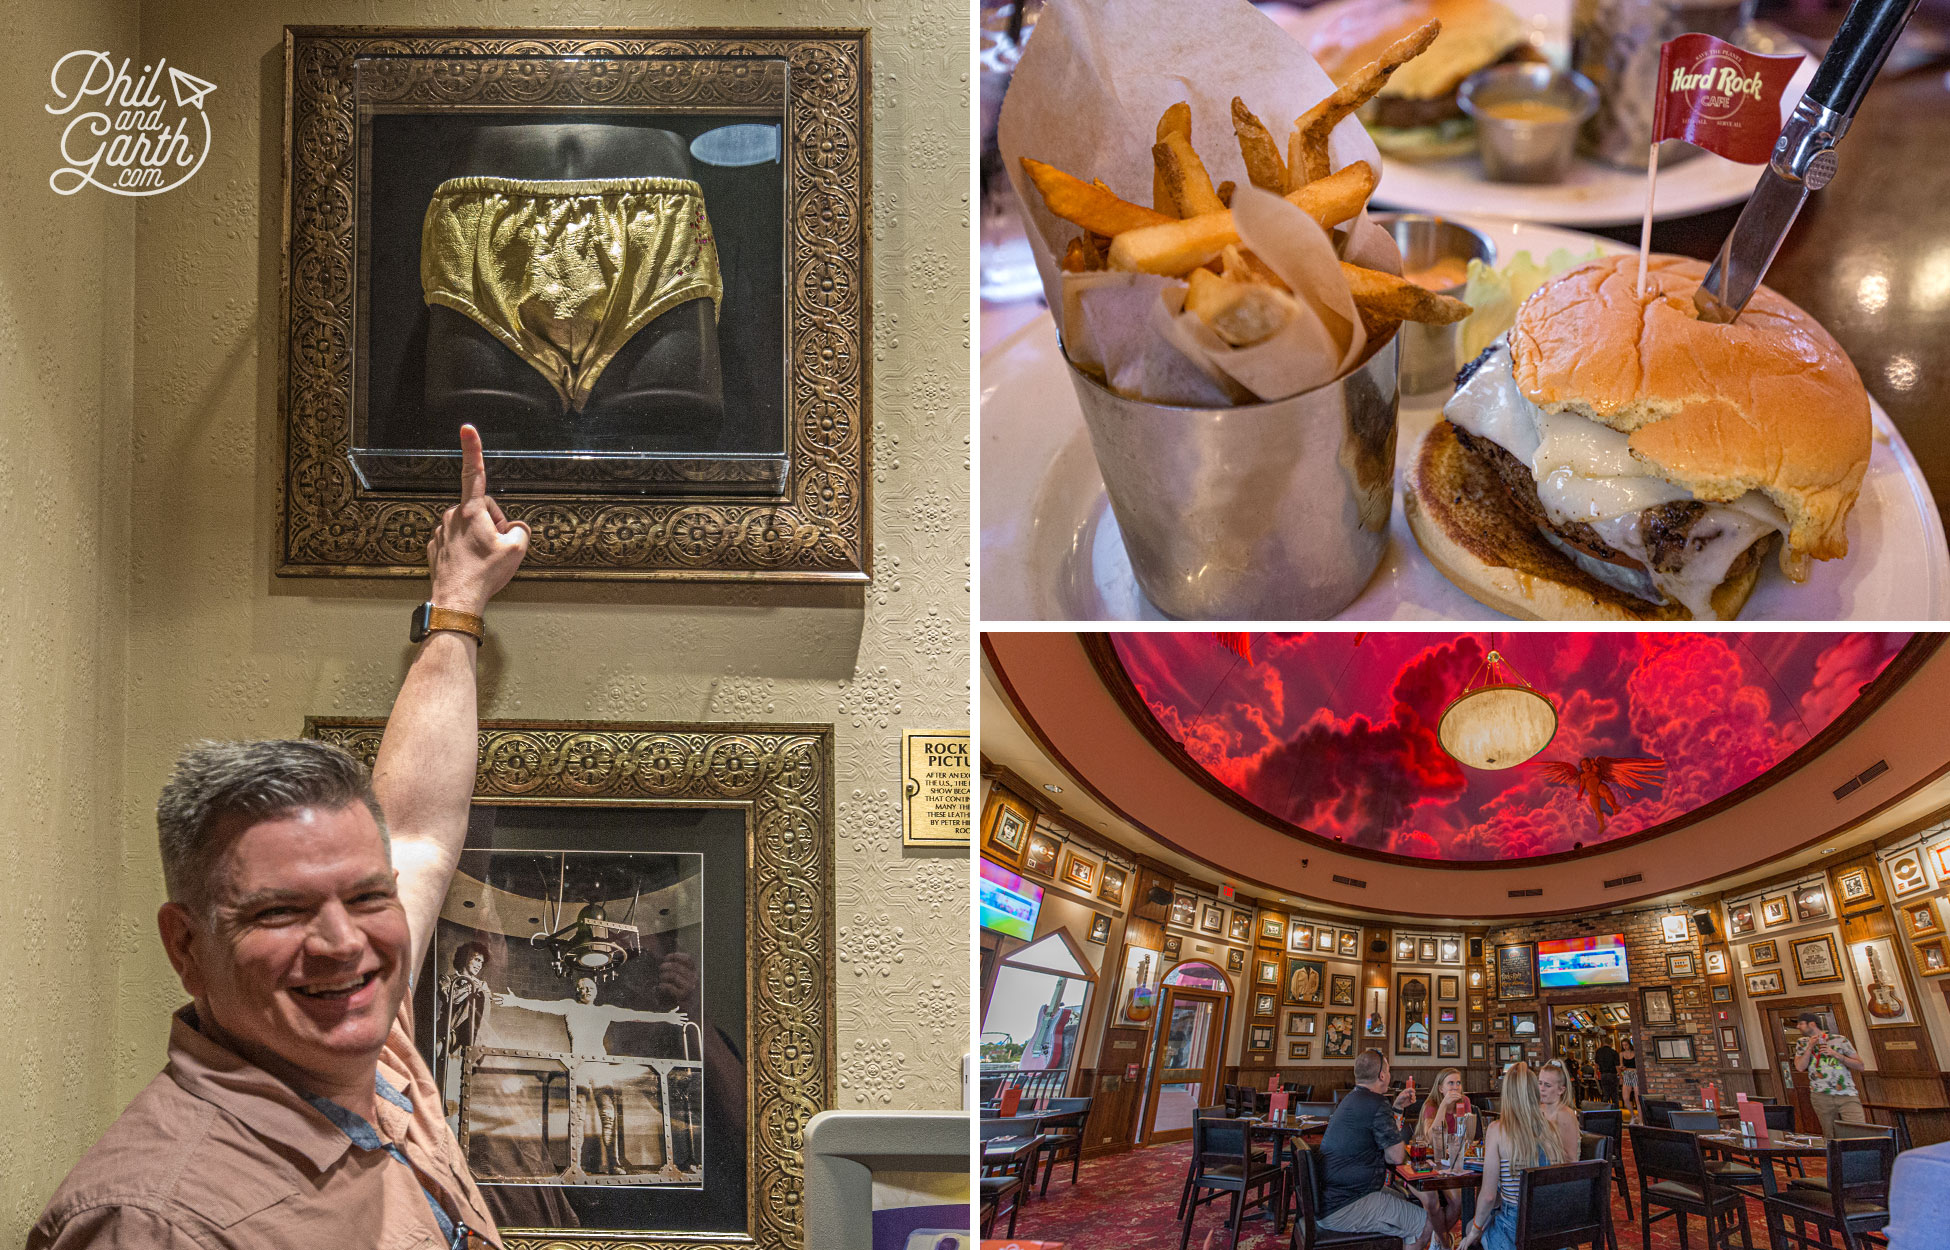 Burger and chips and the original gold pants from The Rocky Horror Picture Show at Hard Rock Cafe Orlando